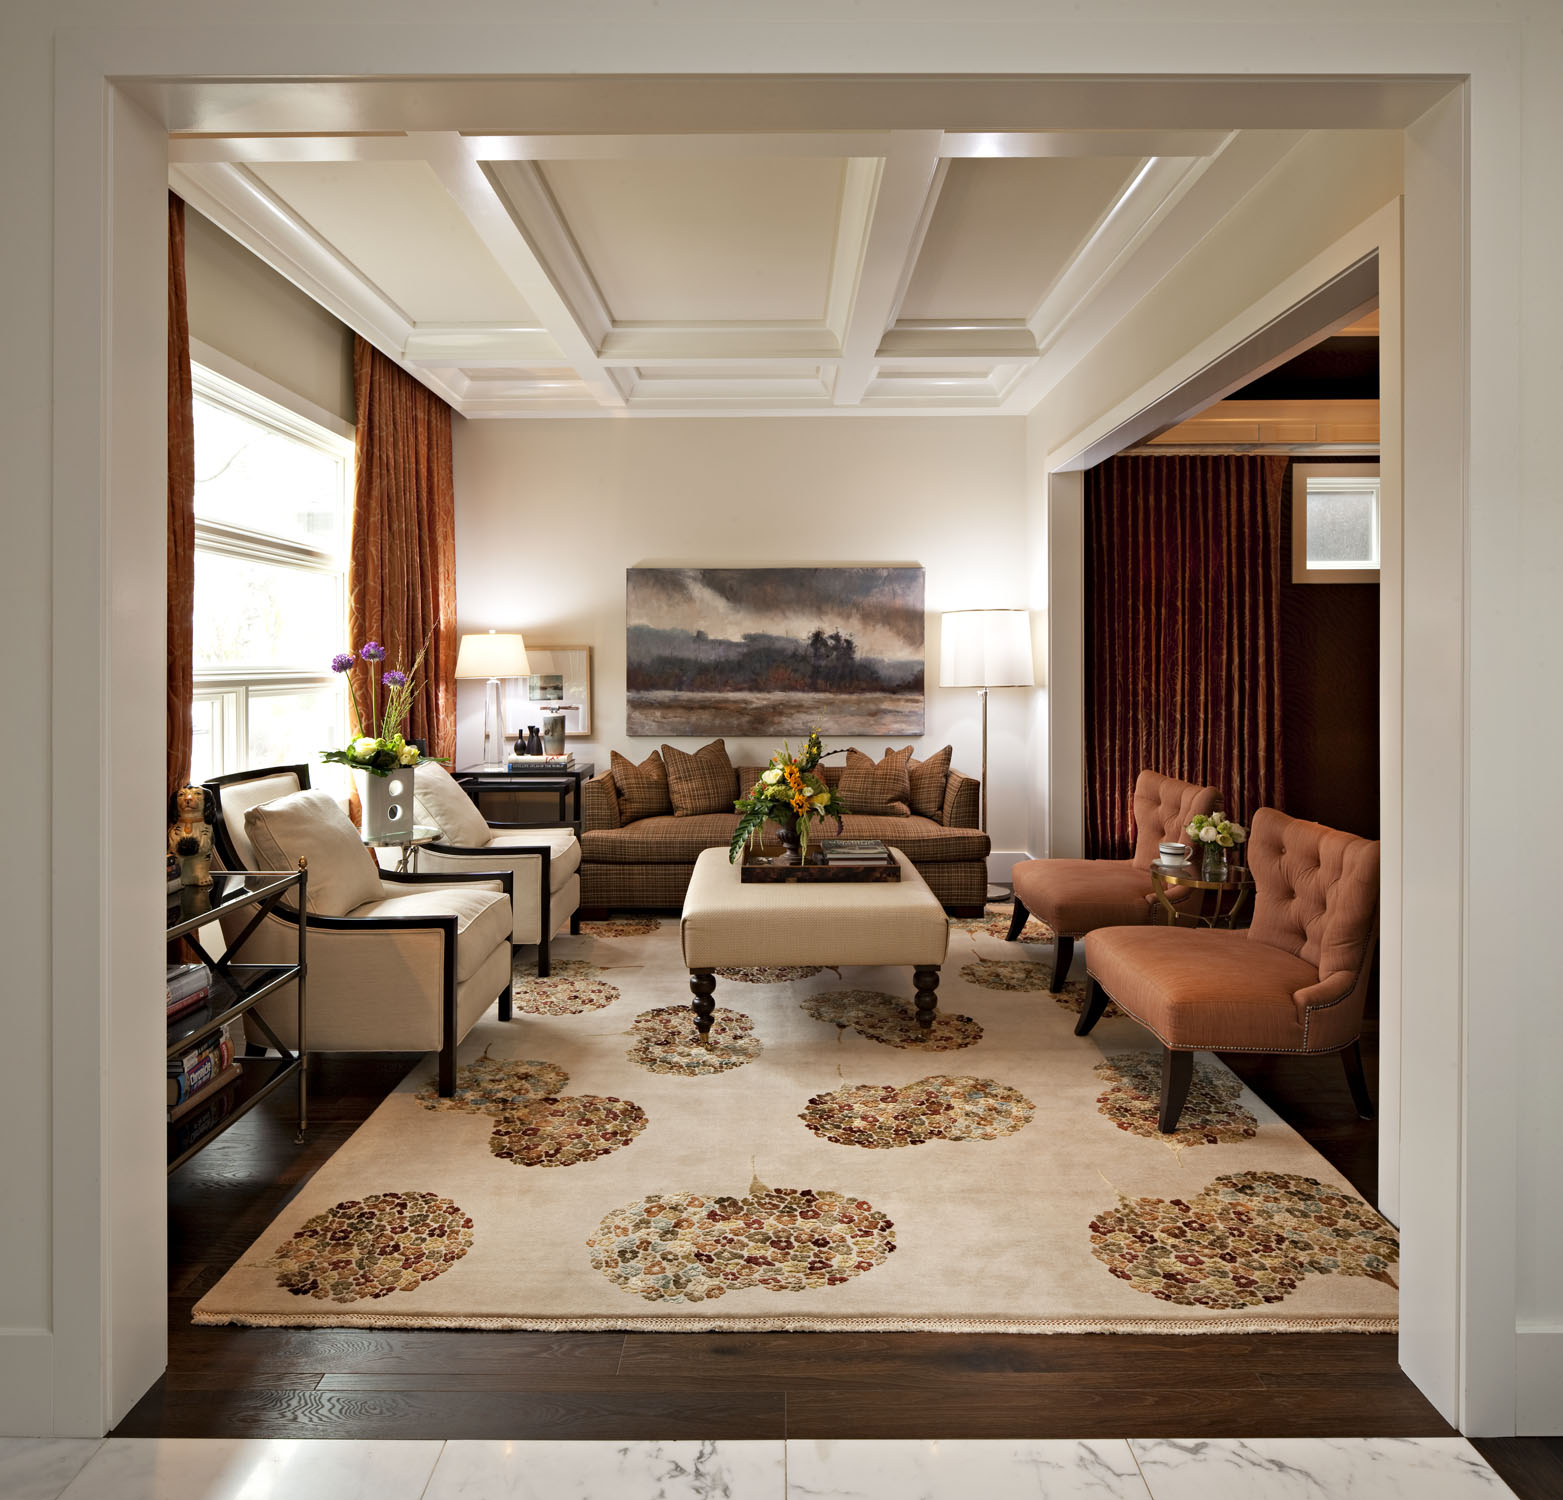 Luxury spanish syle living room with two brown chair and white rug